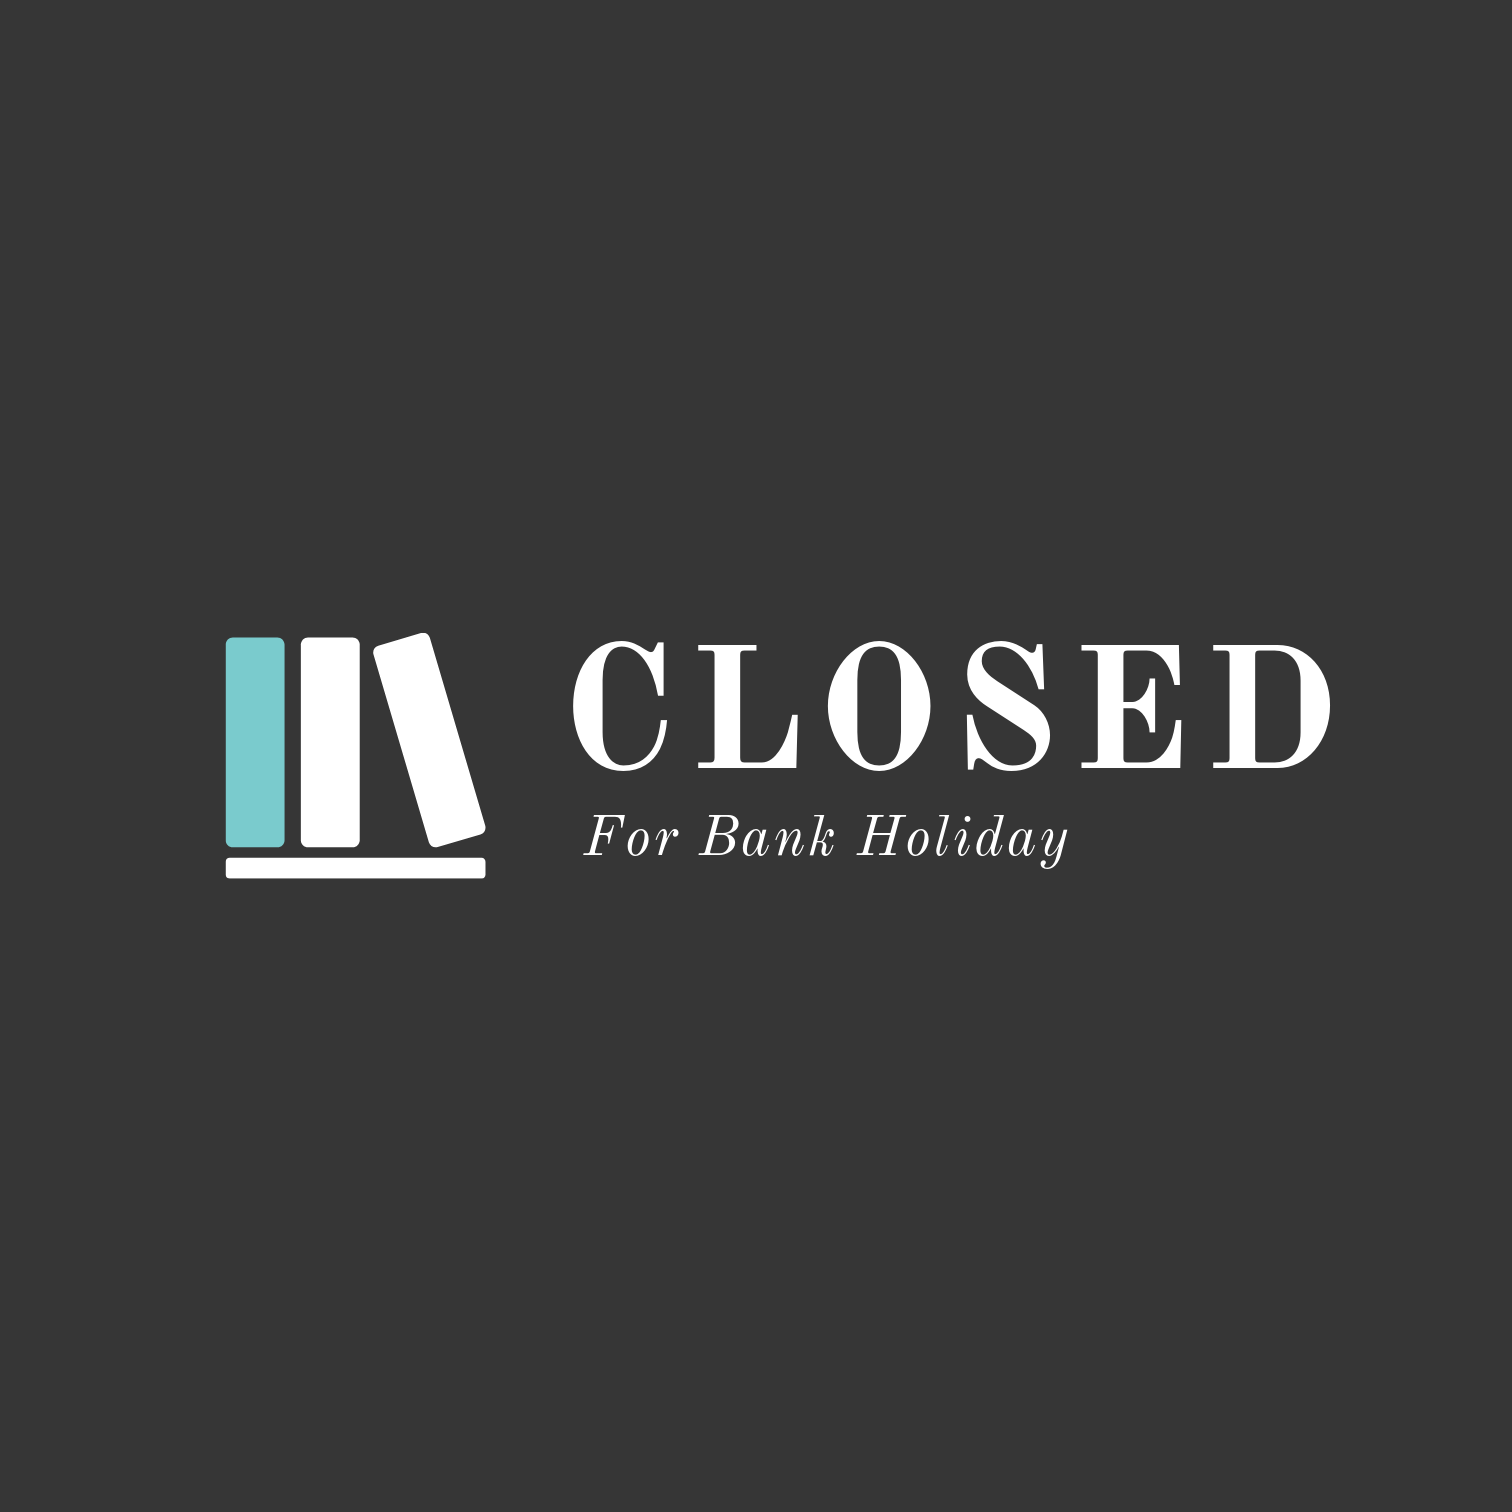 Library Closed for Bank Holiday